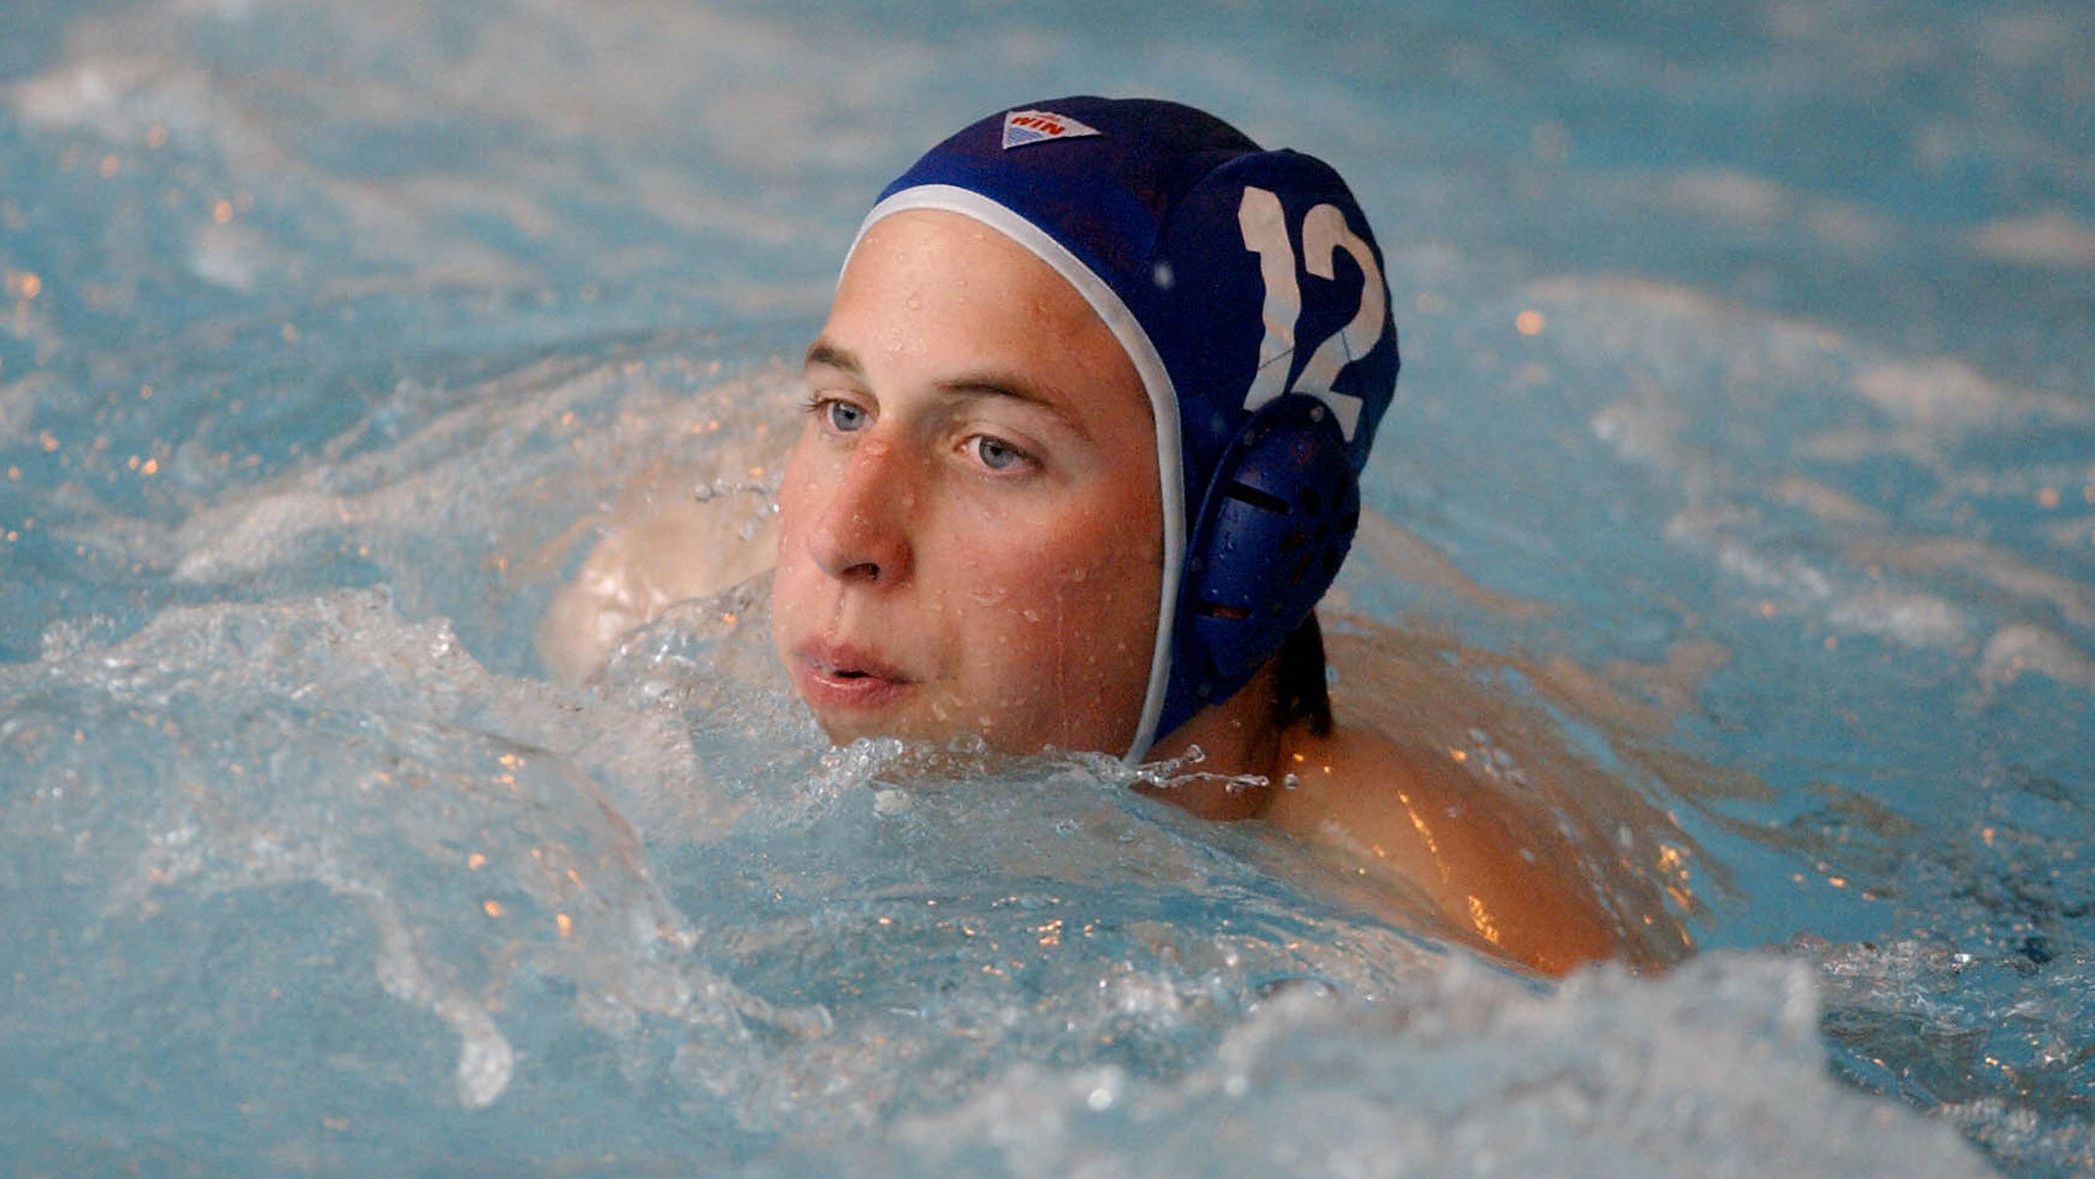 Prince William makes his water polo debut for the Scottish national universities squad during the annual Celtic Nations tournament in April 2004. William was attending the University of St. Andrews.